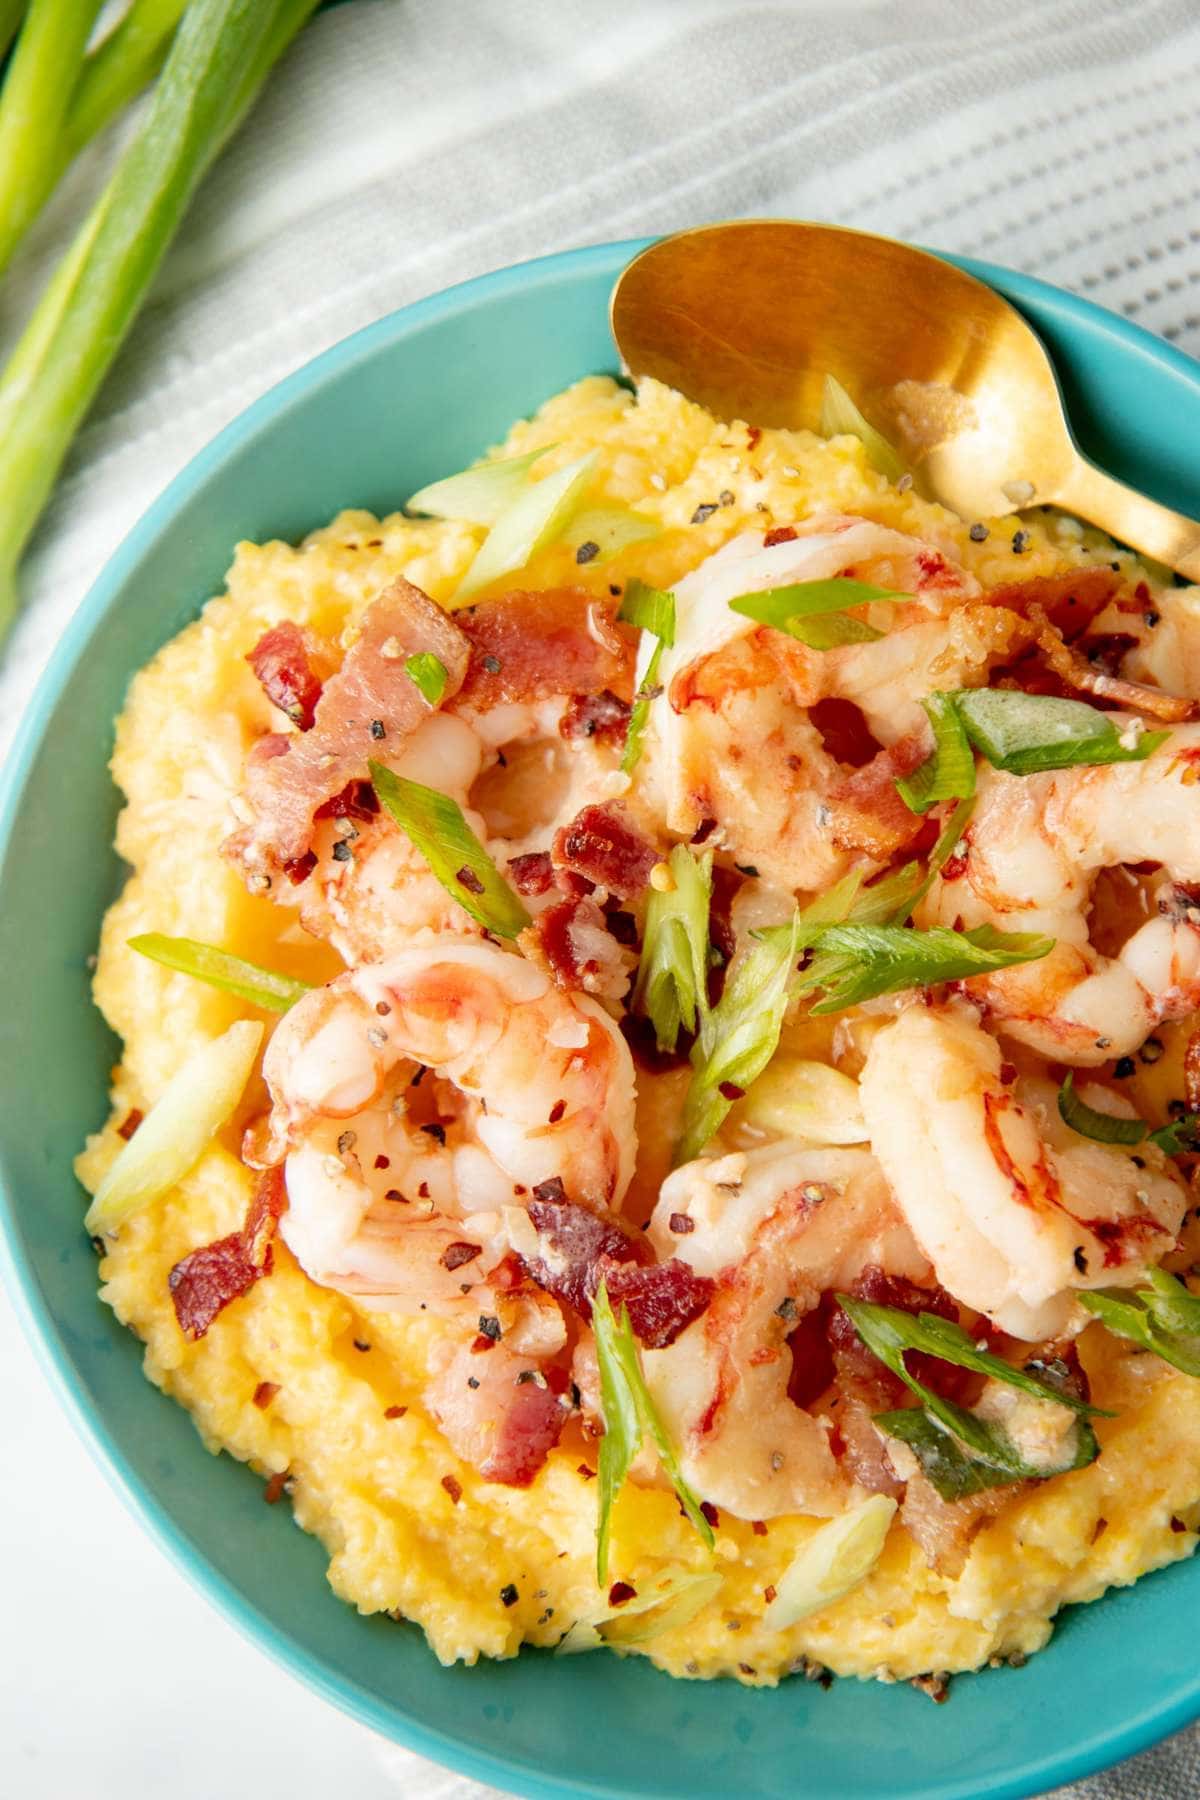 Close view of a bowl of shrimp and grits garnished with crumbled bacon and sliced green onion.